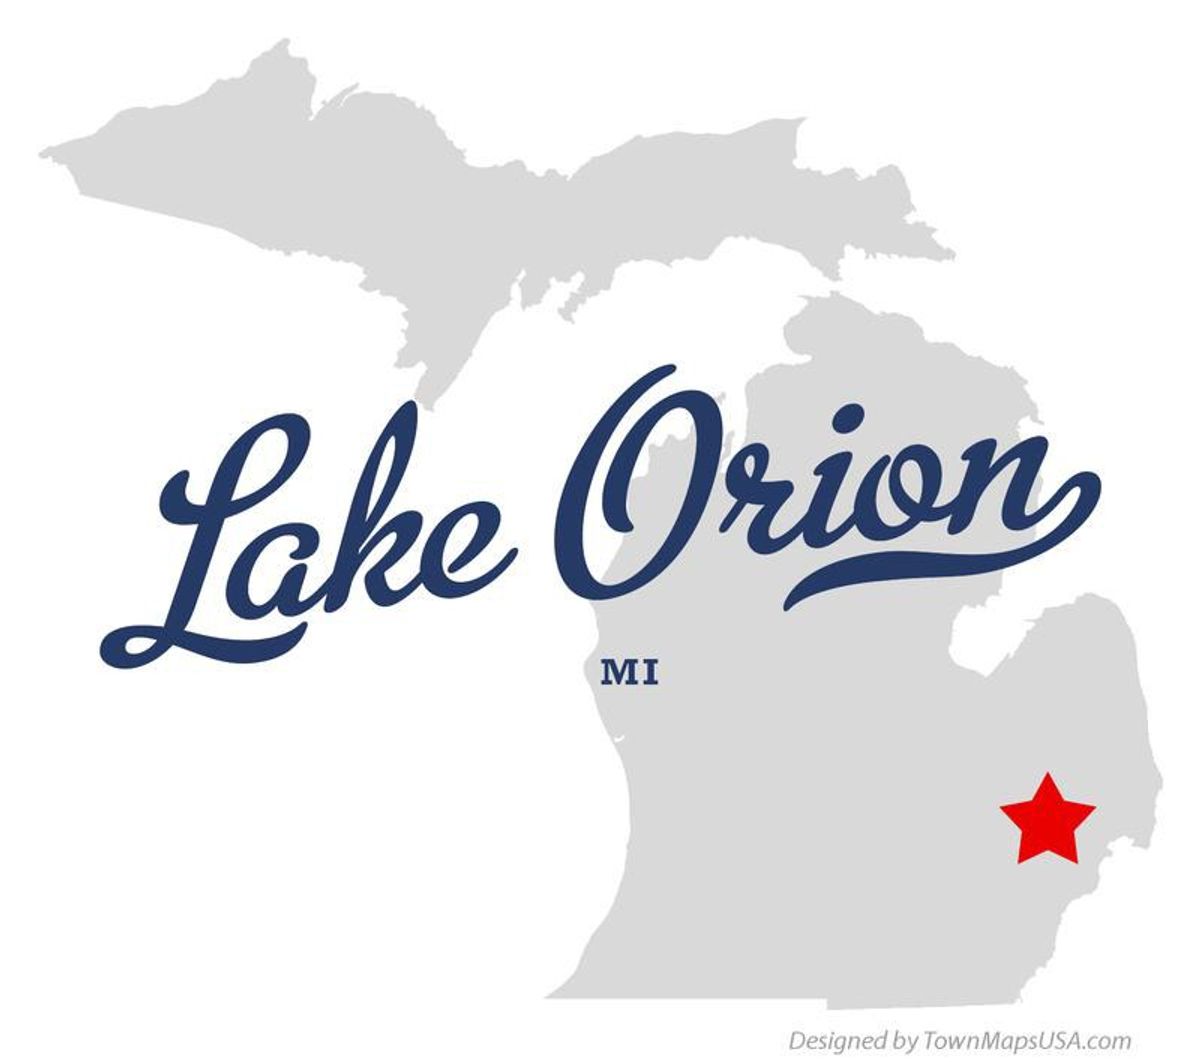 11 Reasons Why Lake Orion Is The Best Place To Live During The Summer